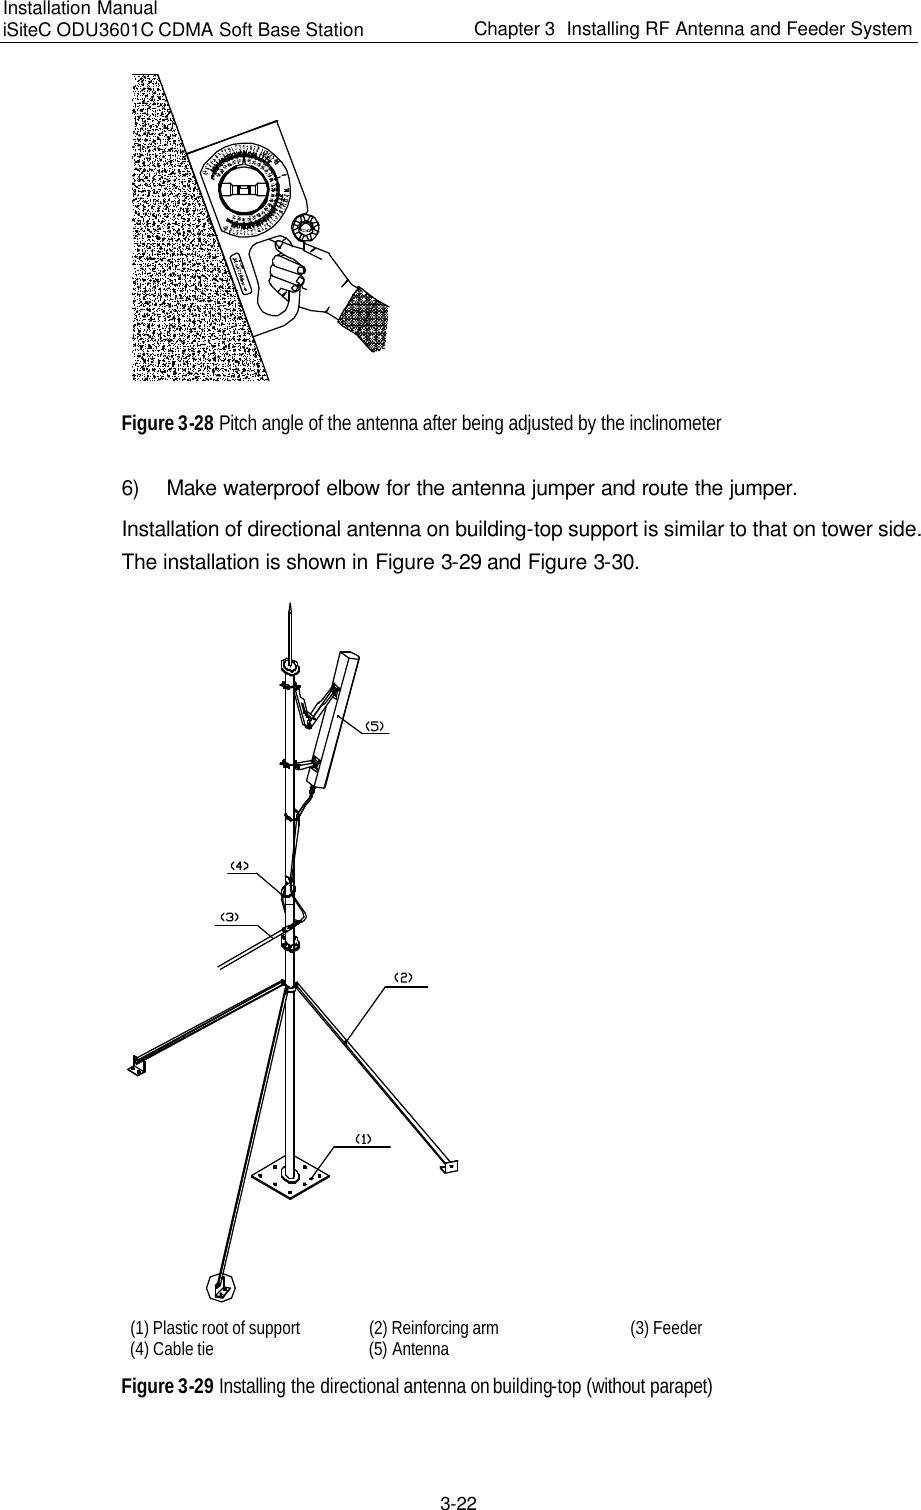 Installation Manual   iSiteC ODU3601C CDMA Soft Base Station Chapter 3  Installing RF Antenna and Feeder System  3-22  Figure 3-28 Pitch angle of the antenna after being adjusted by the inclinometer 6) Make waterproof elbow for the antenna jumper and route the jumper. Installation of directional antenna on building-top support is similar to that on tower side. The installation is shown in Figure 3-29 and Figure 3-30.  (1) Plastic root of support (2) Reinforcing arm (3) Feeder (4) Cable tie (5) Antenna   Figure 3-29 Installing the directional antenna on building-top (without parapet) 